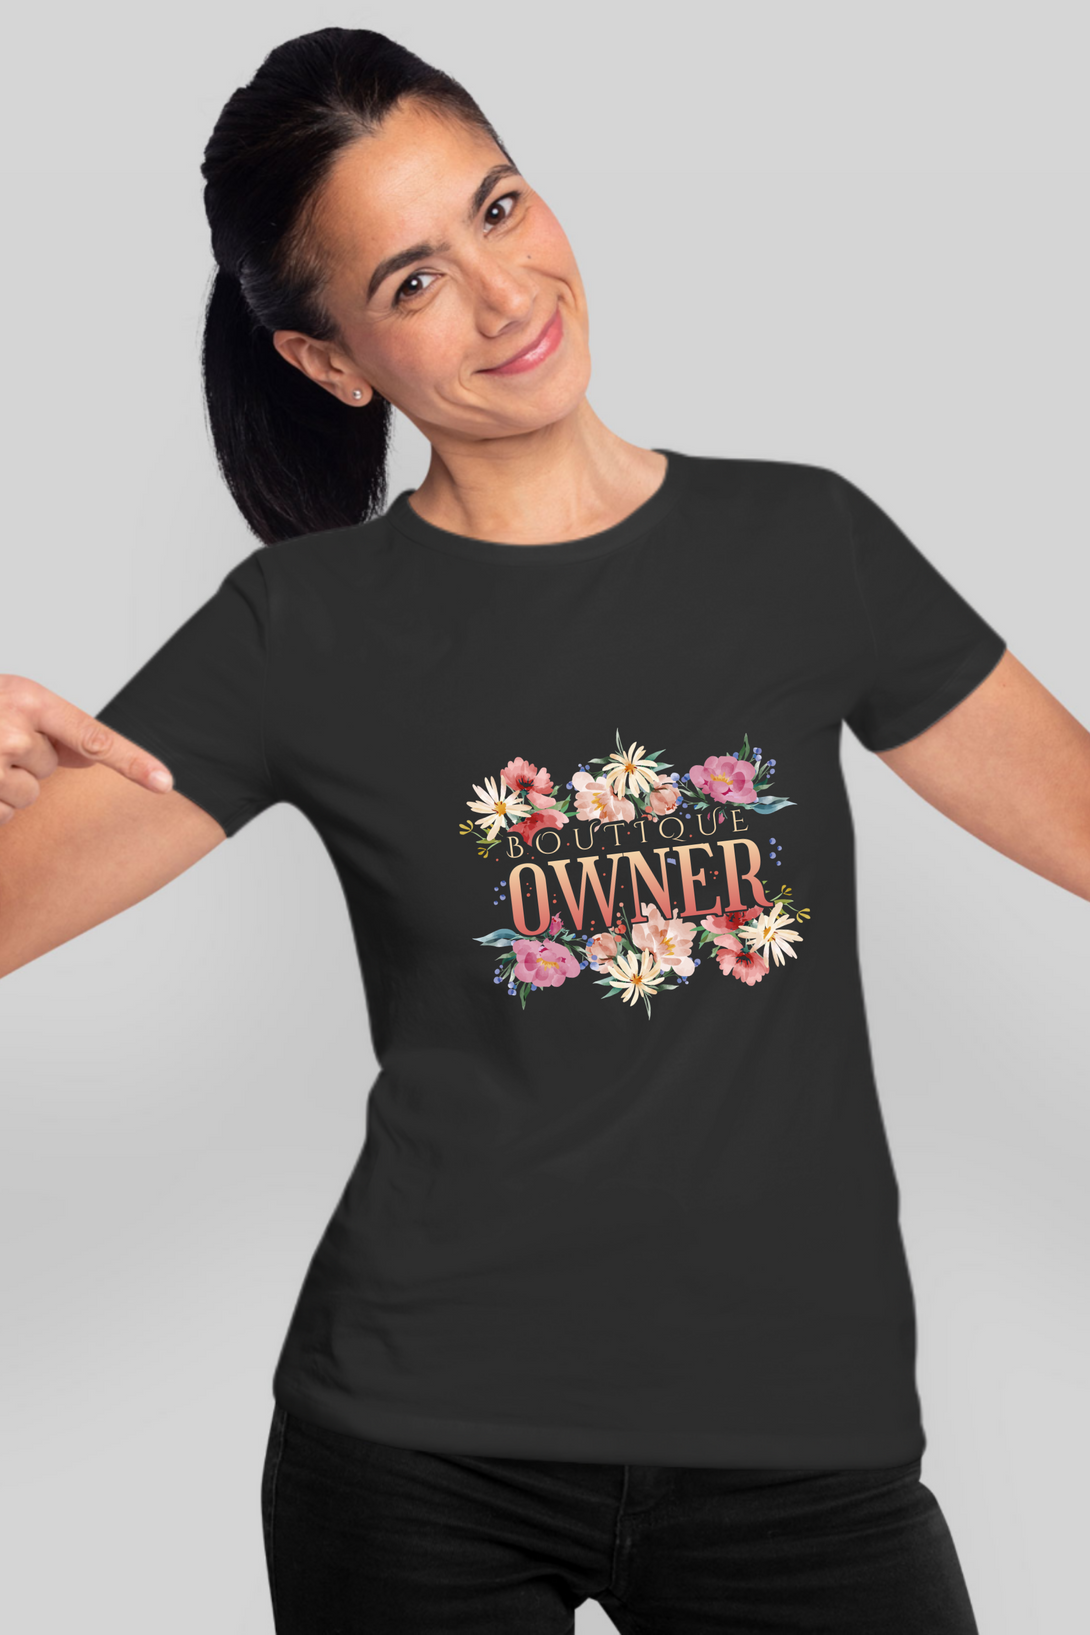 Flowers Boutique Printed T-Shirt For Women - WowWaves - 10